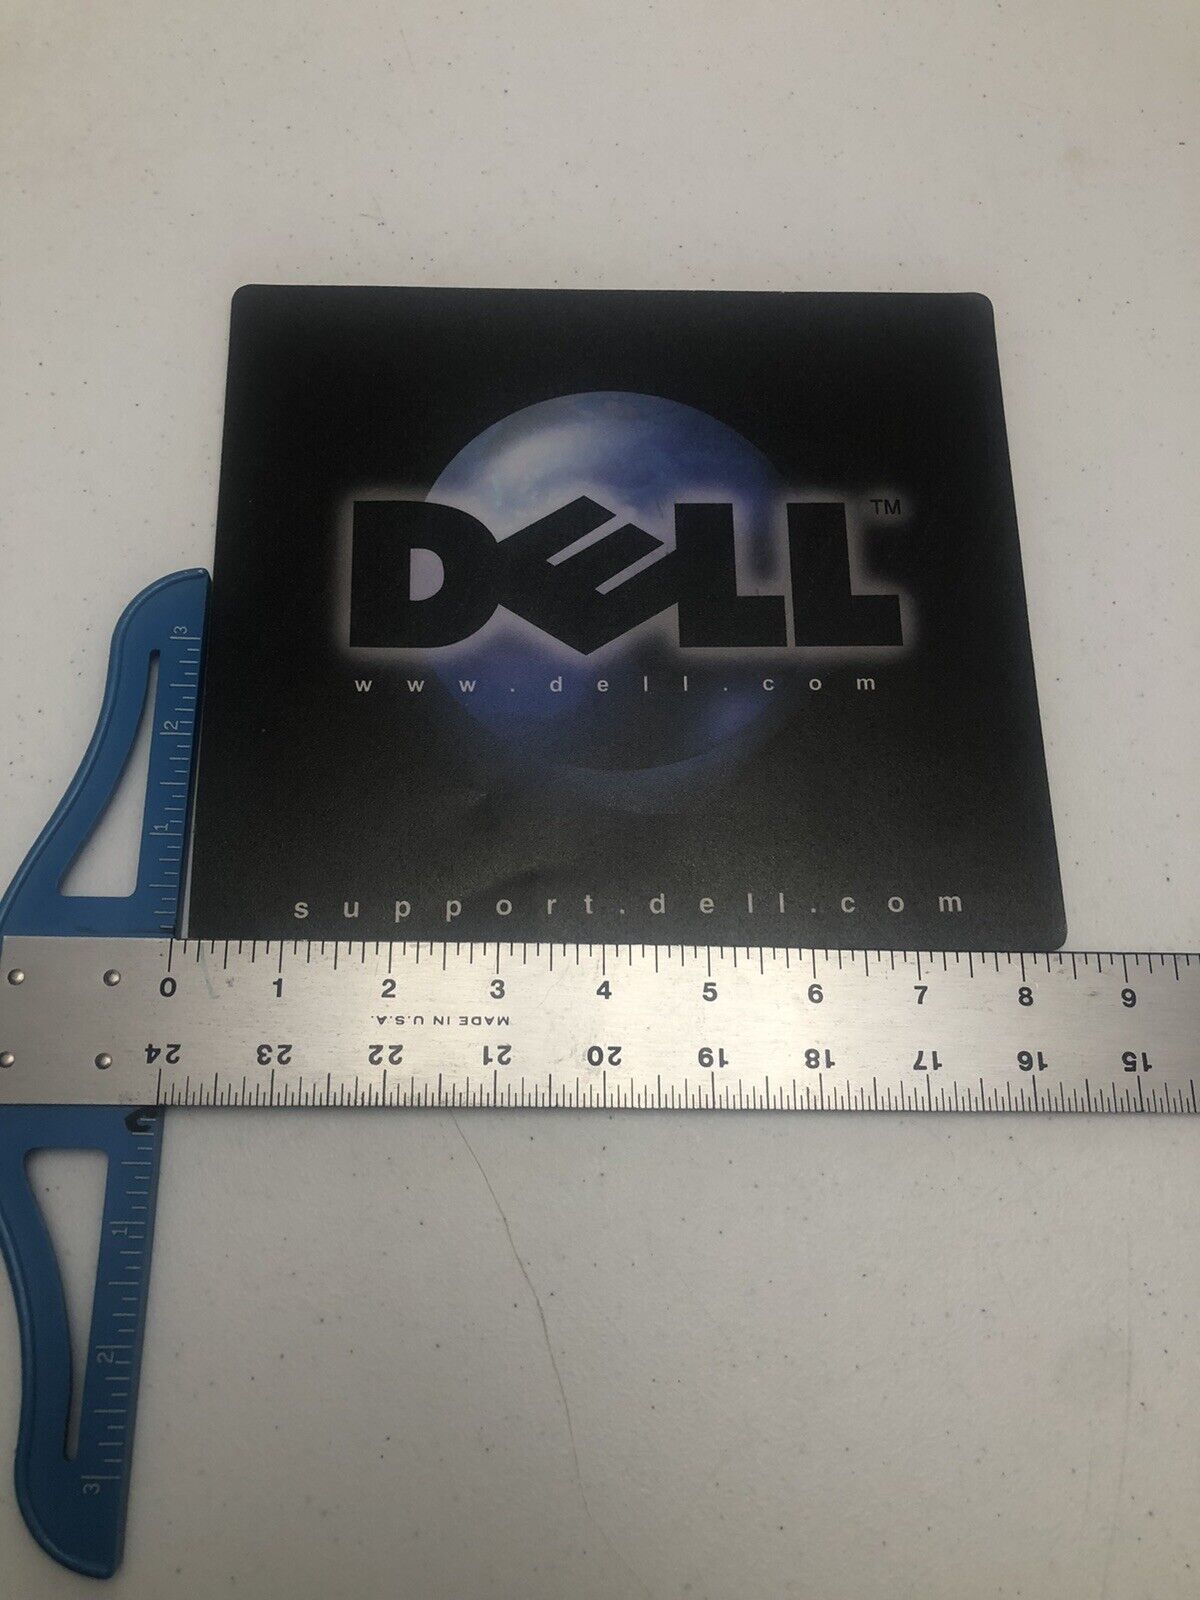 Vintage DELL Computers Mouse Pad Support.Dell.com Blue & Black